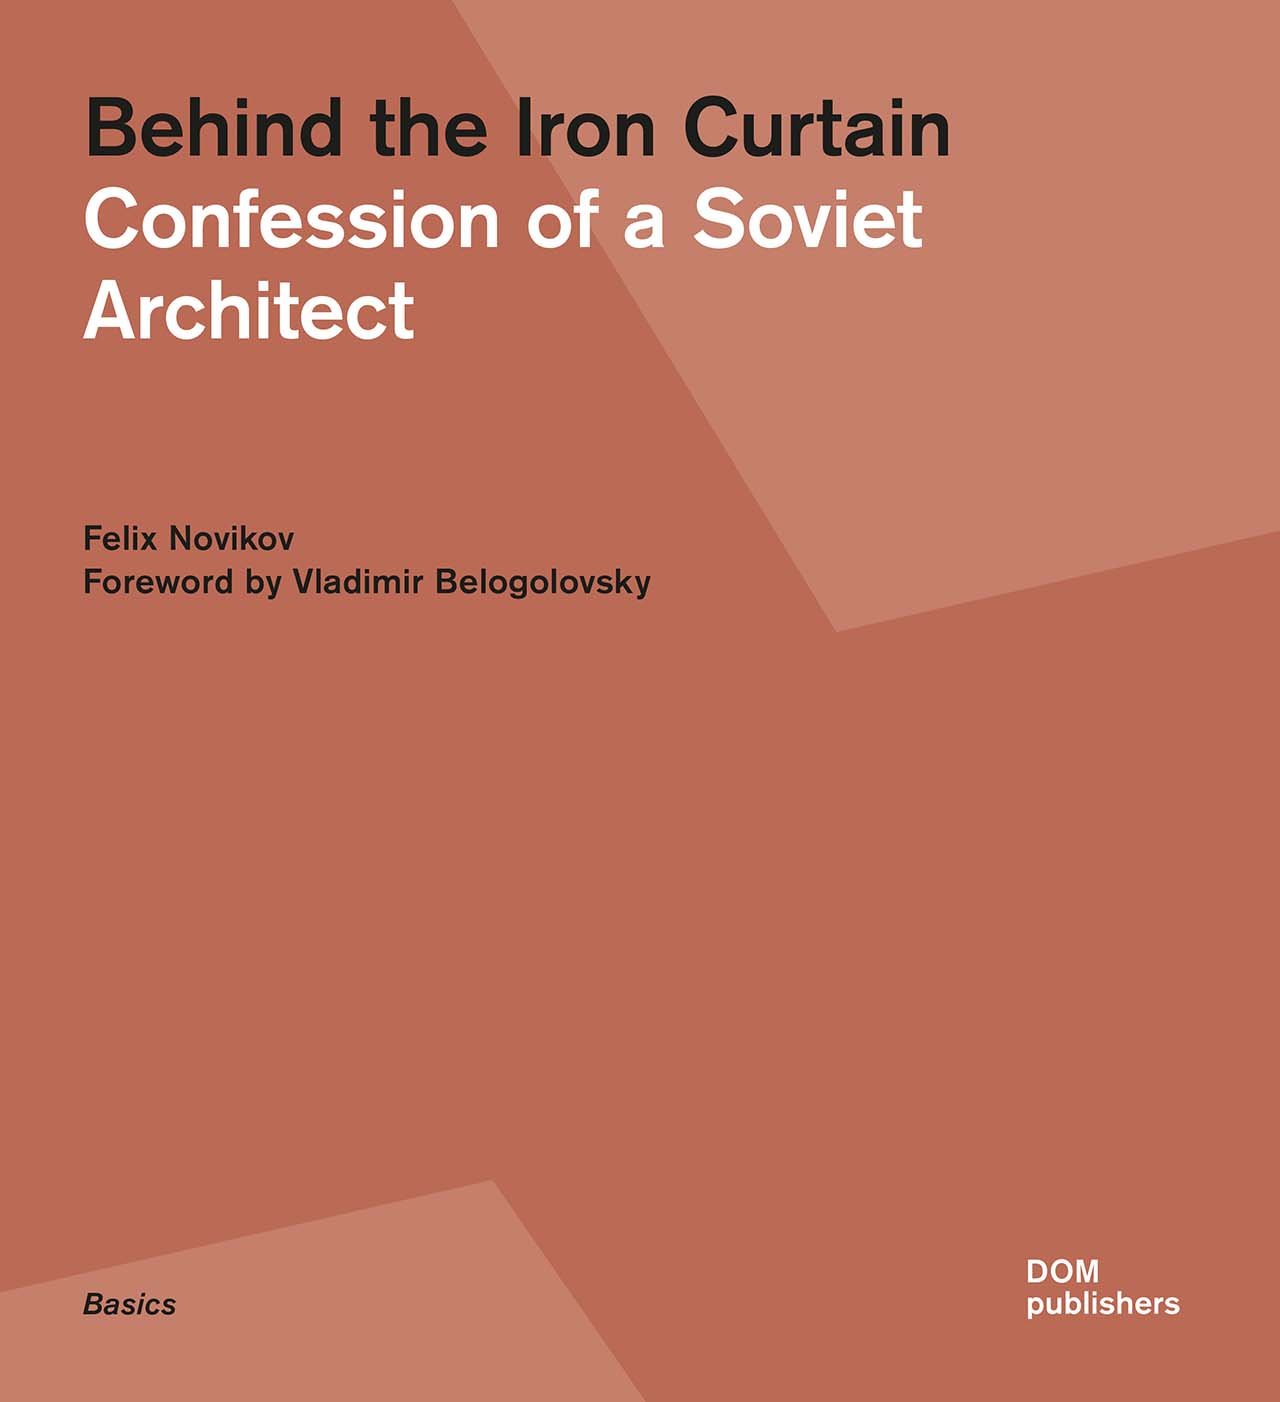 Behind the Iron Curtain: Confession of a Soviet Architect